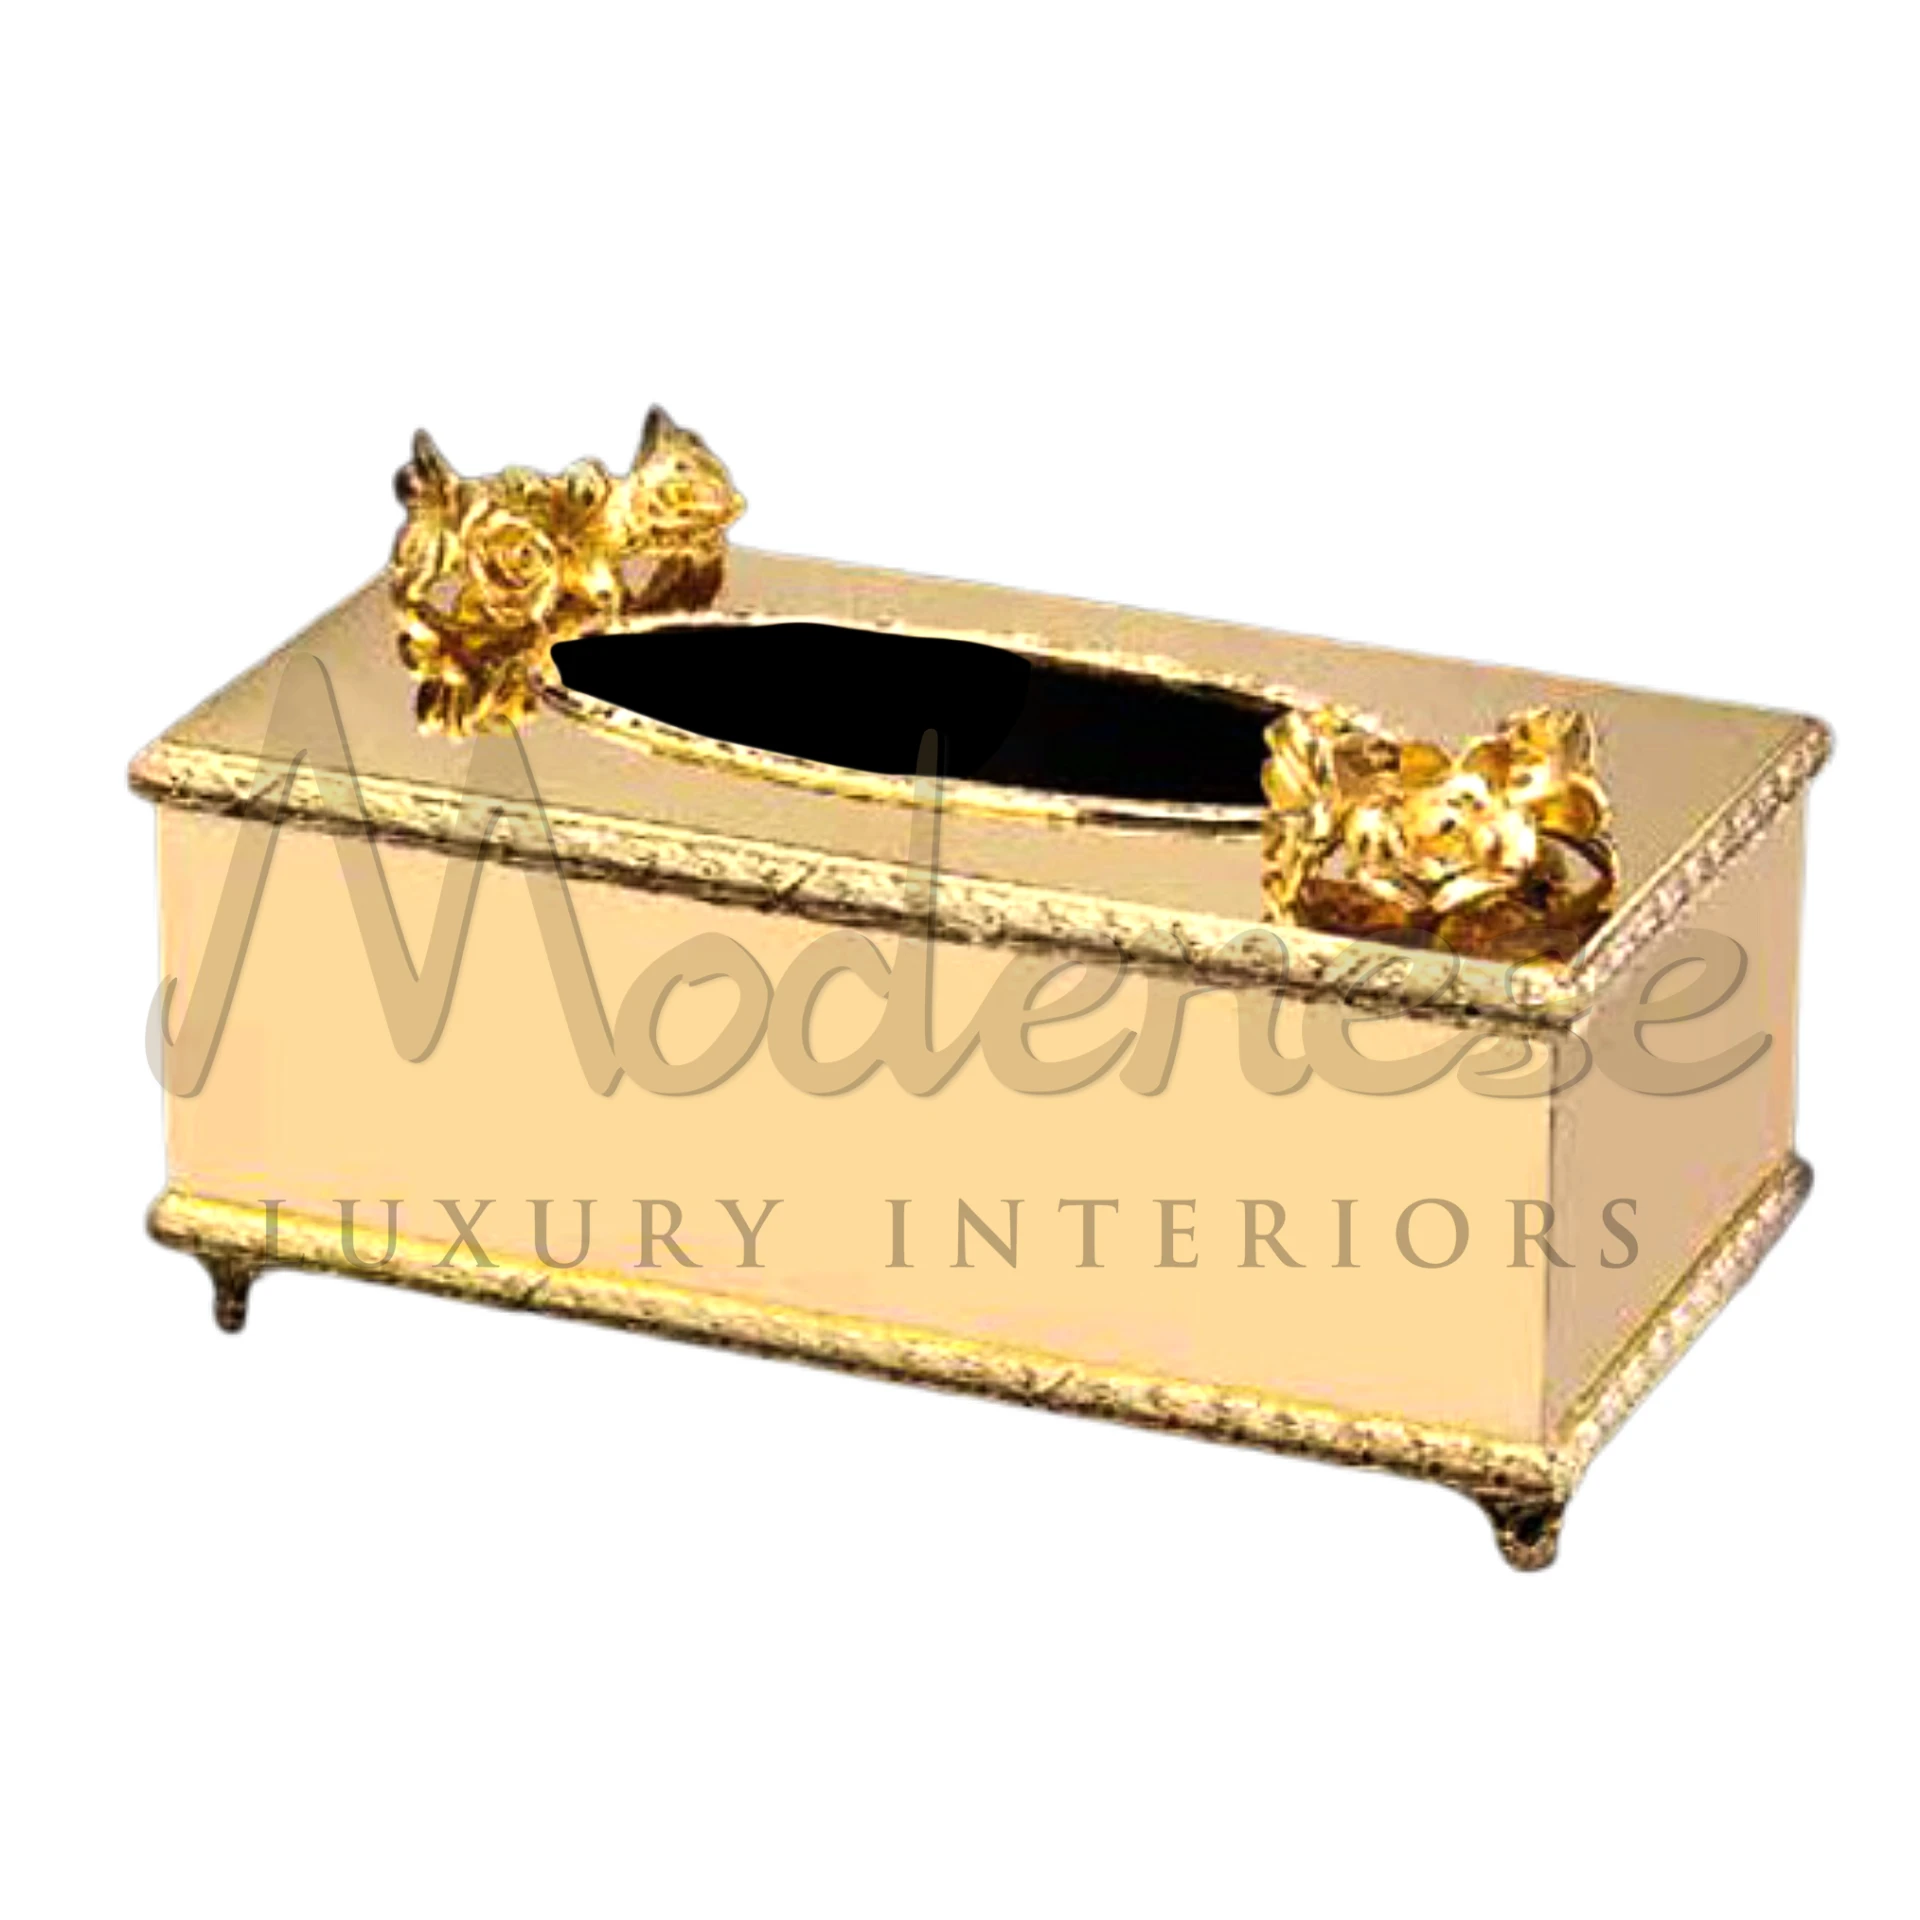 Elegant Classical Tissue Cover in colors like white, cream, gold, and silver, ideal for stylish decor.